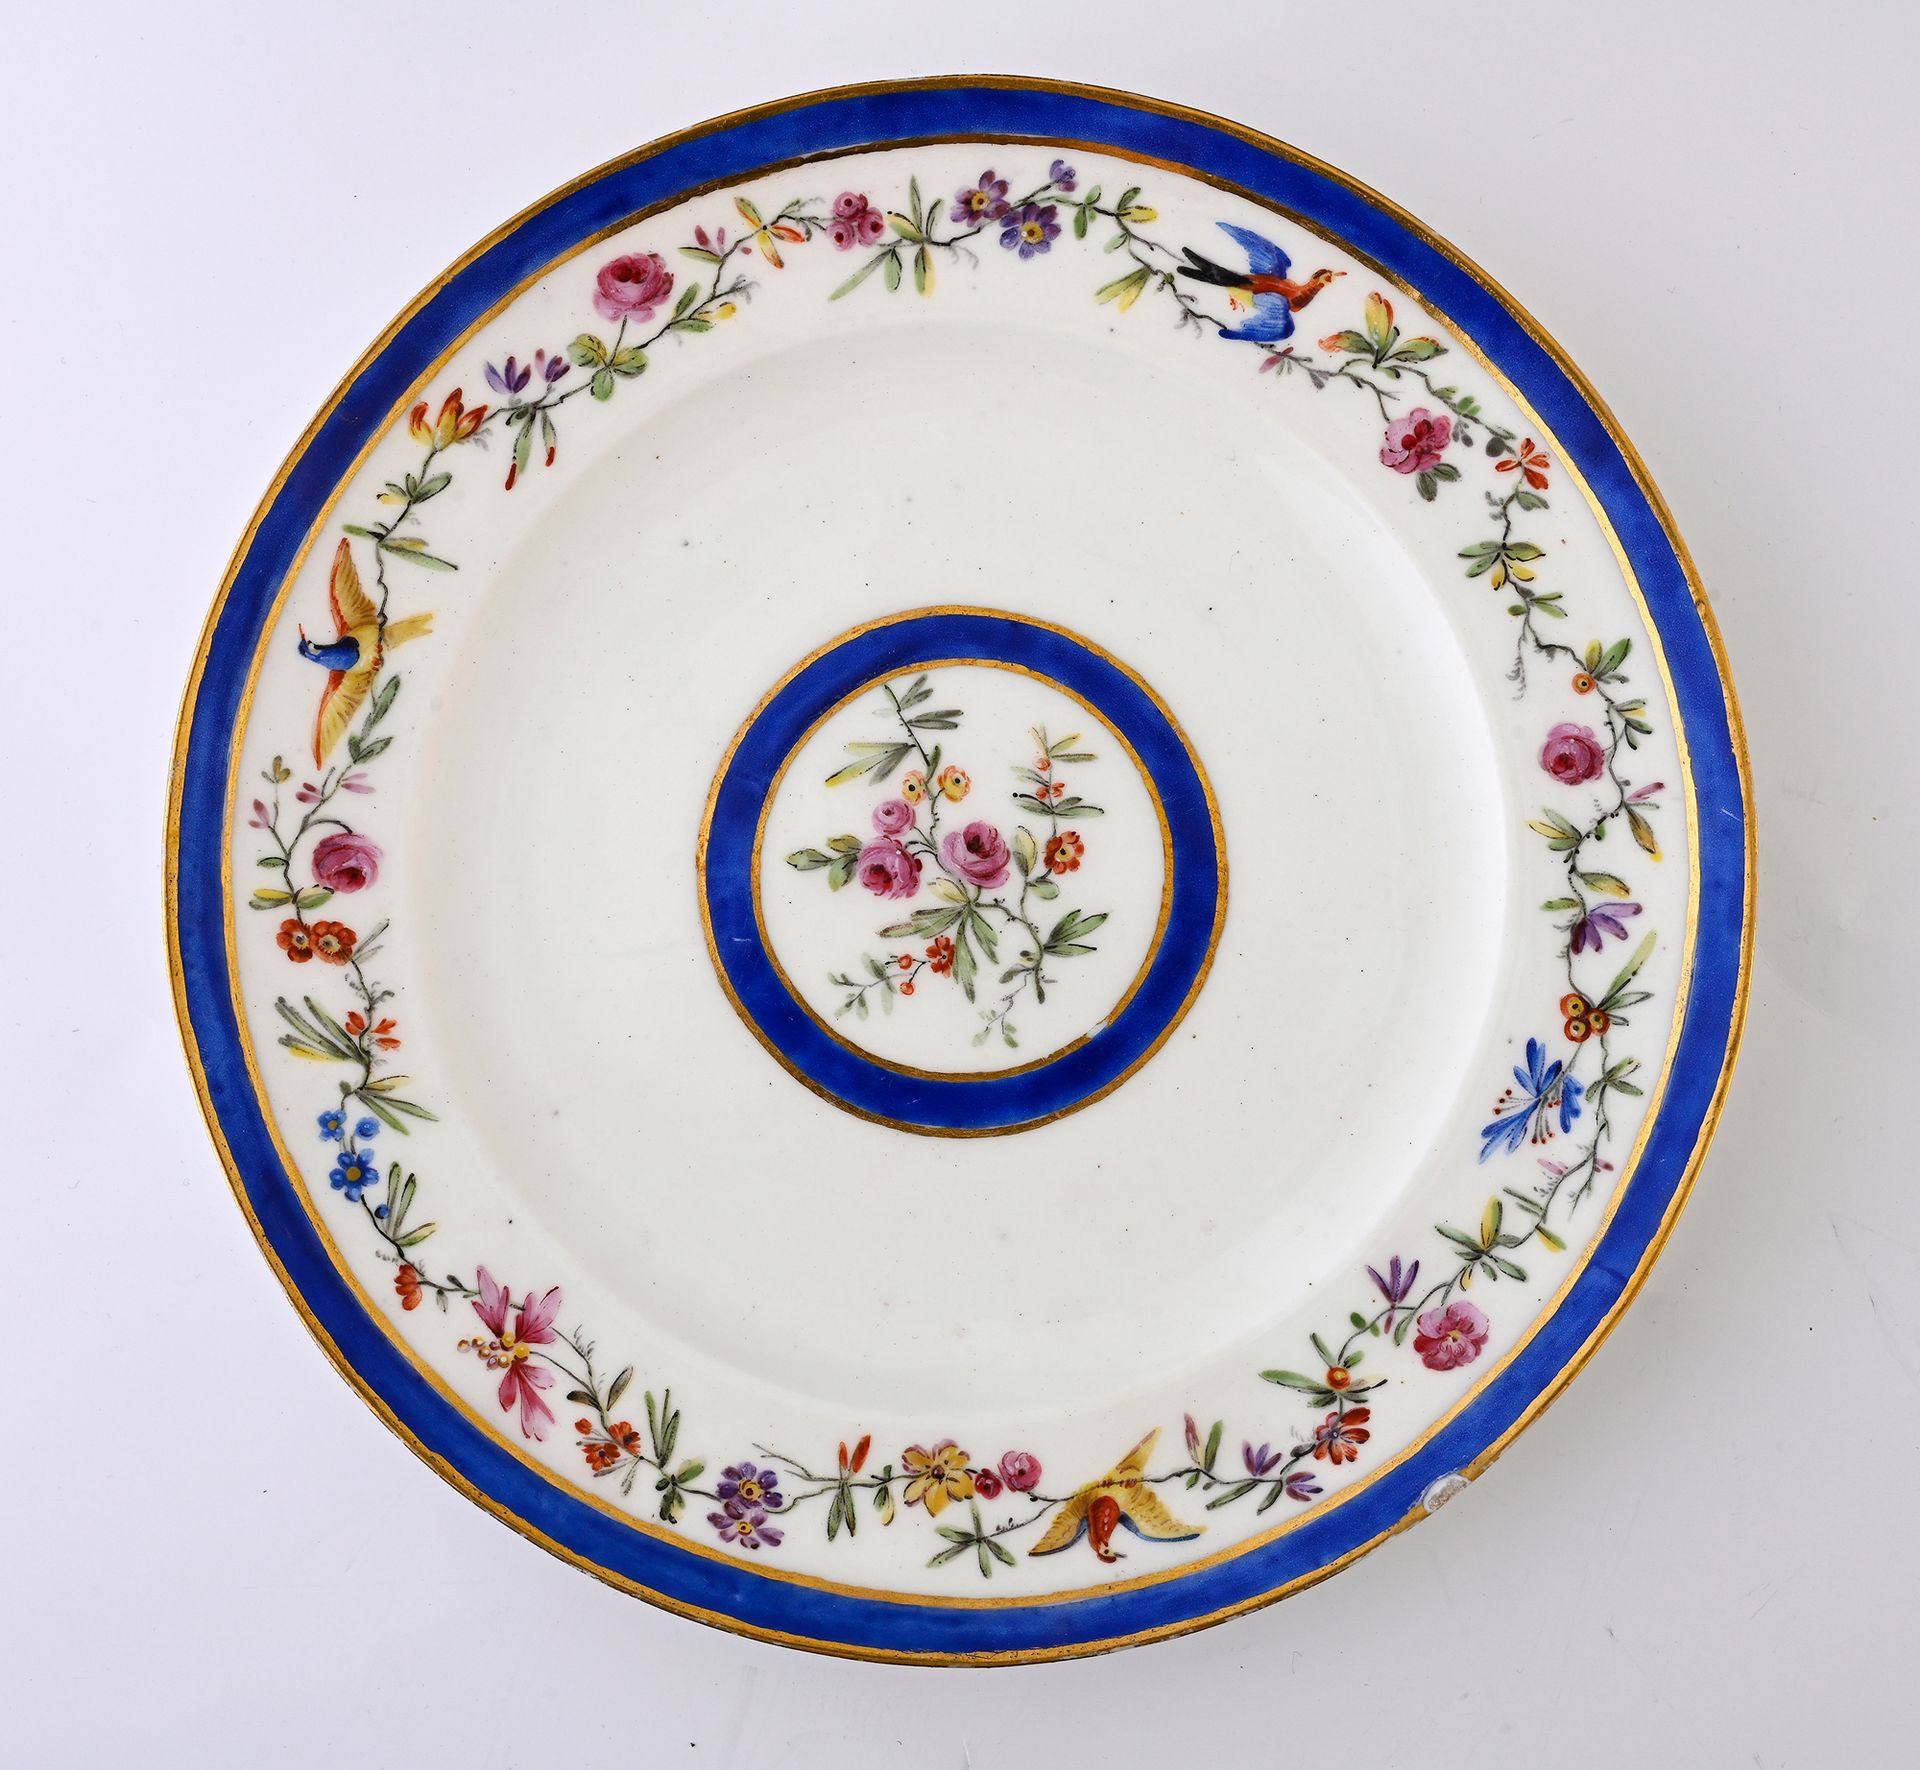 Null Plate "plain" in Sèvres porcelain of the late eighteenth century
Mark in Se&hellip;